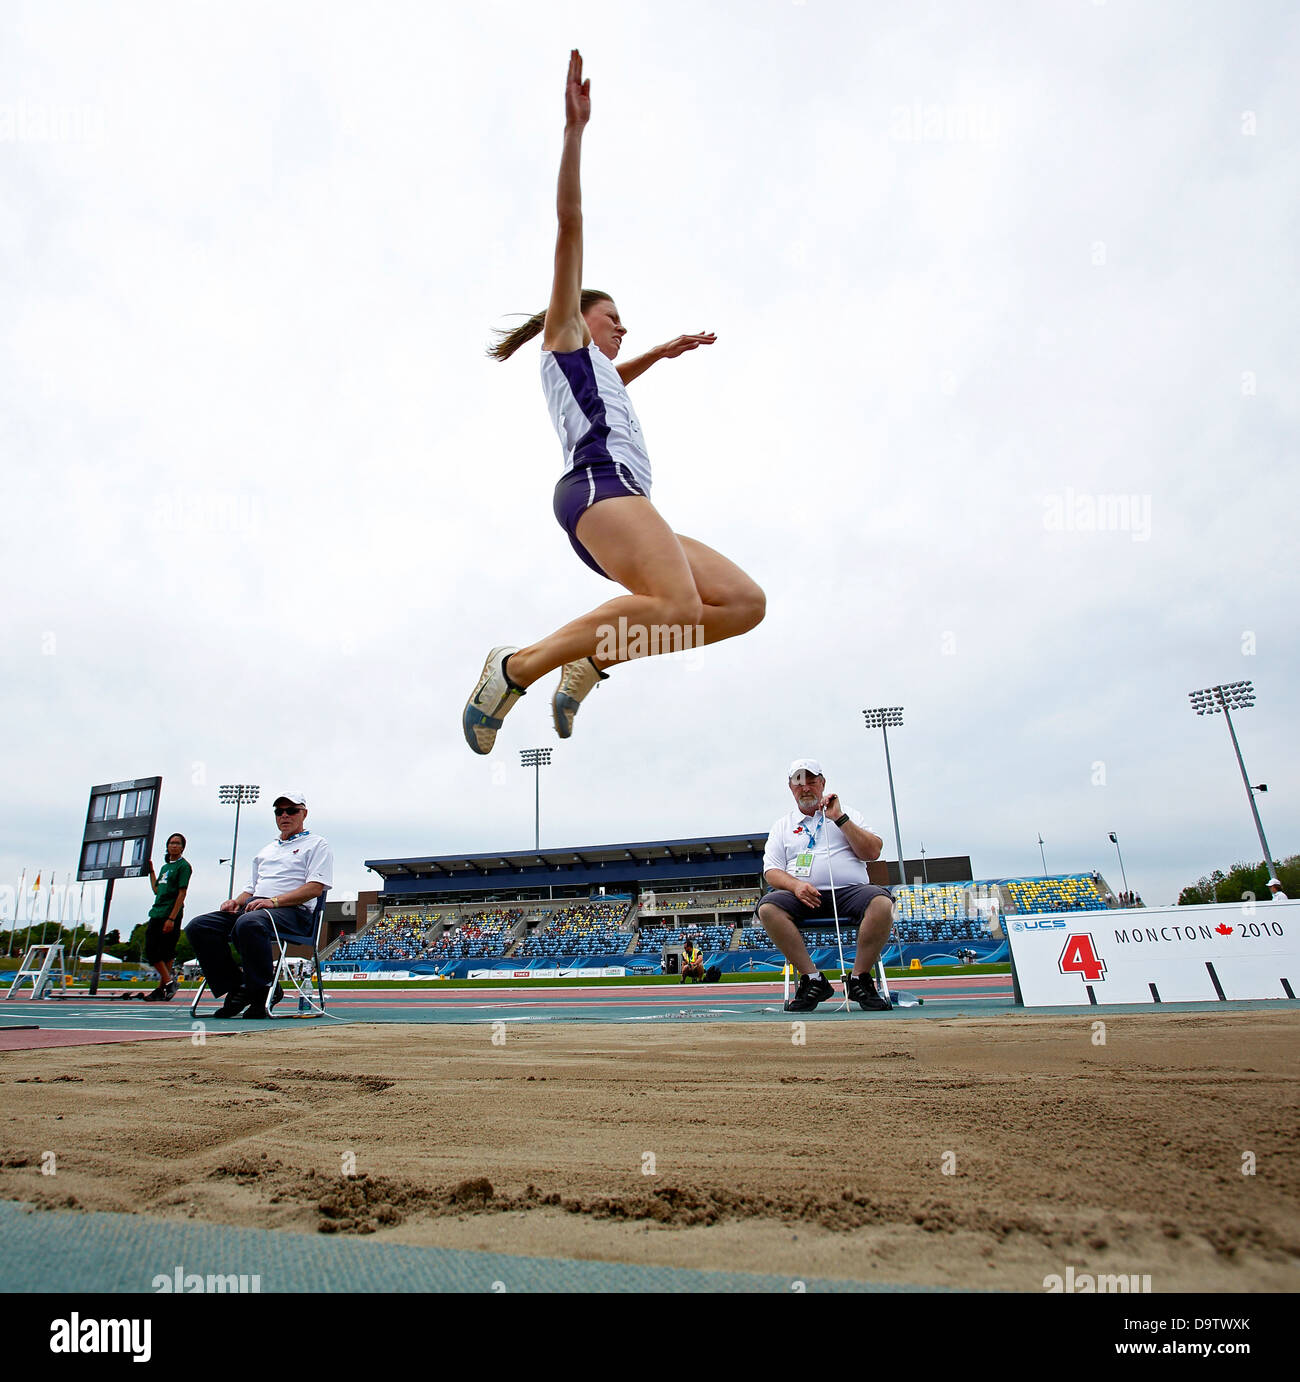 Heptathlon long jumper Jennifer Cotten competes at the Canadian Track & Field Championships June 22, 2013 in Moncton, Canada. Stock Photo